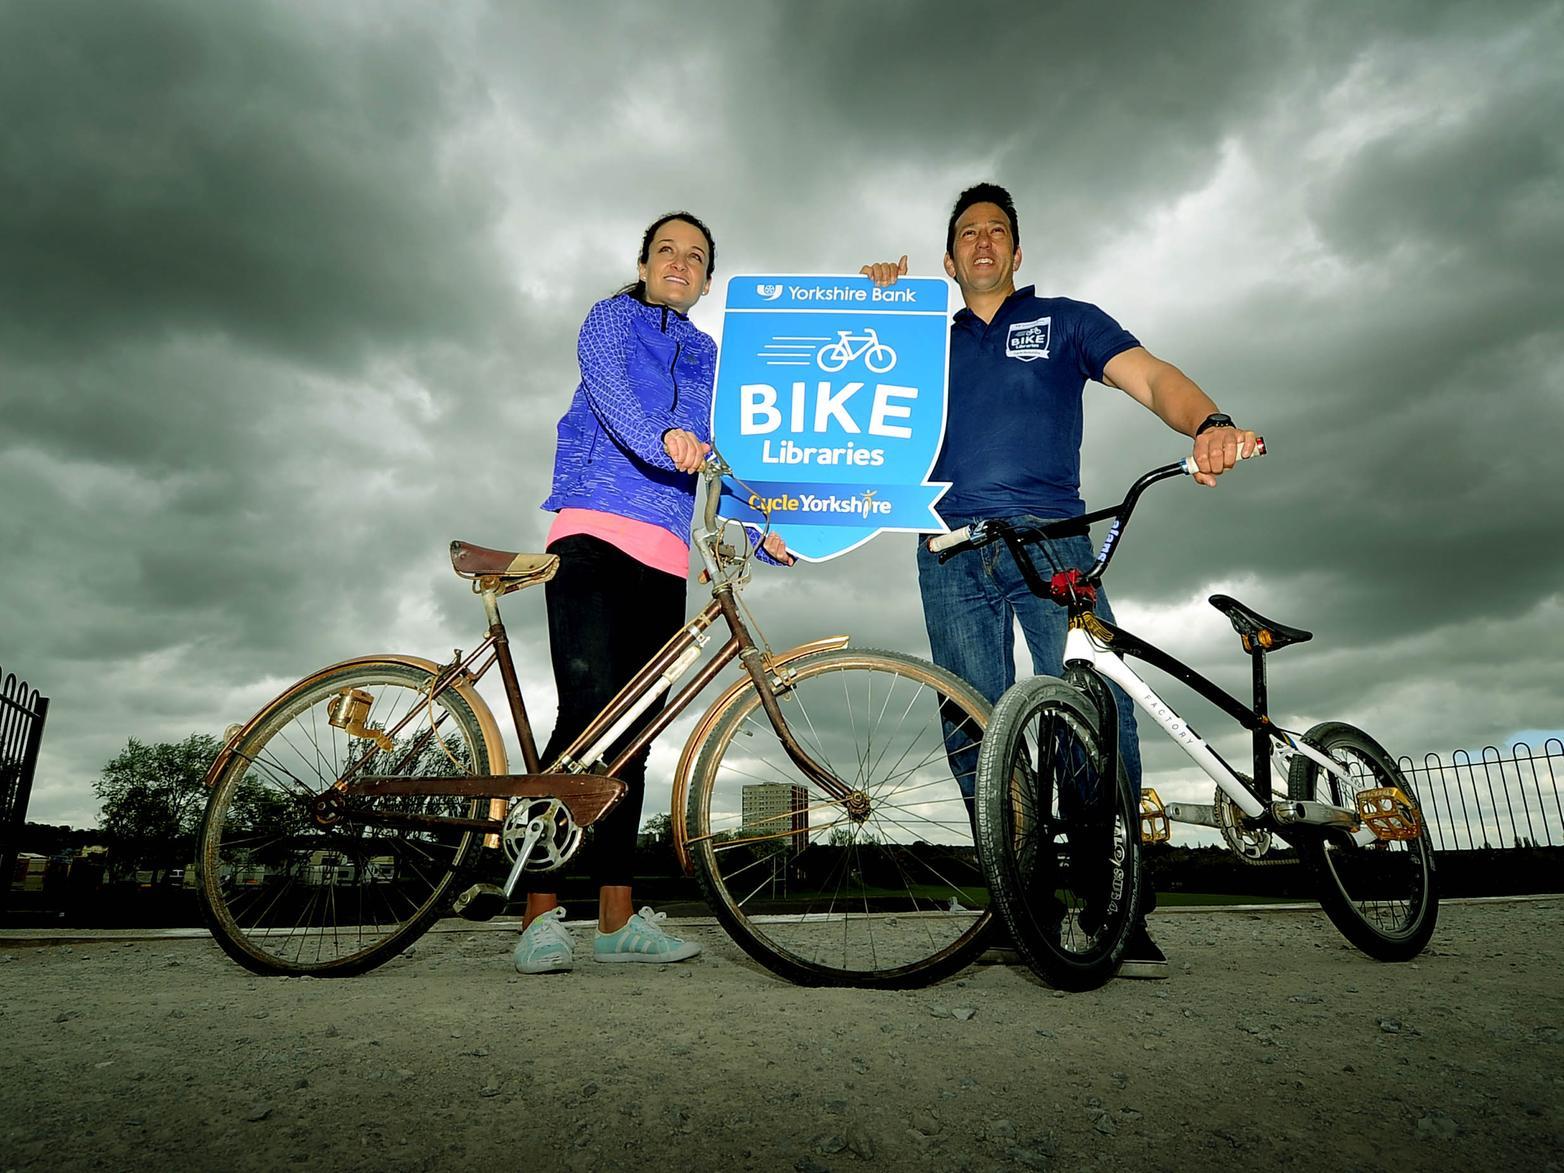 Donate a bike to to the Yorkshire Bike Bank Library, to give a less fortunate child the present of a bike. Find locations here: https://bikelibraries.yorkshire.com/locations/